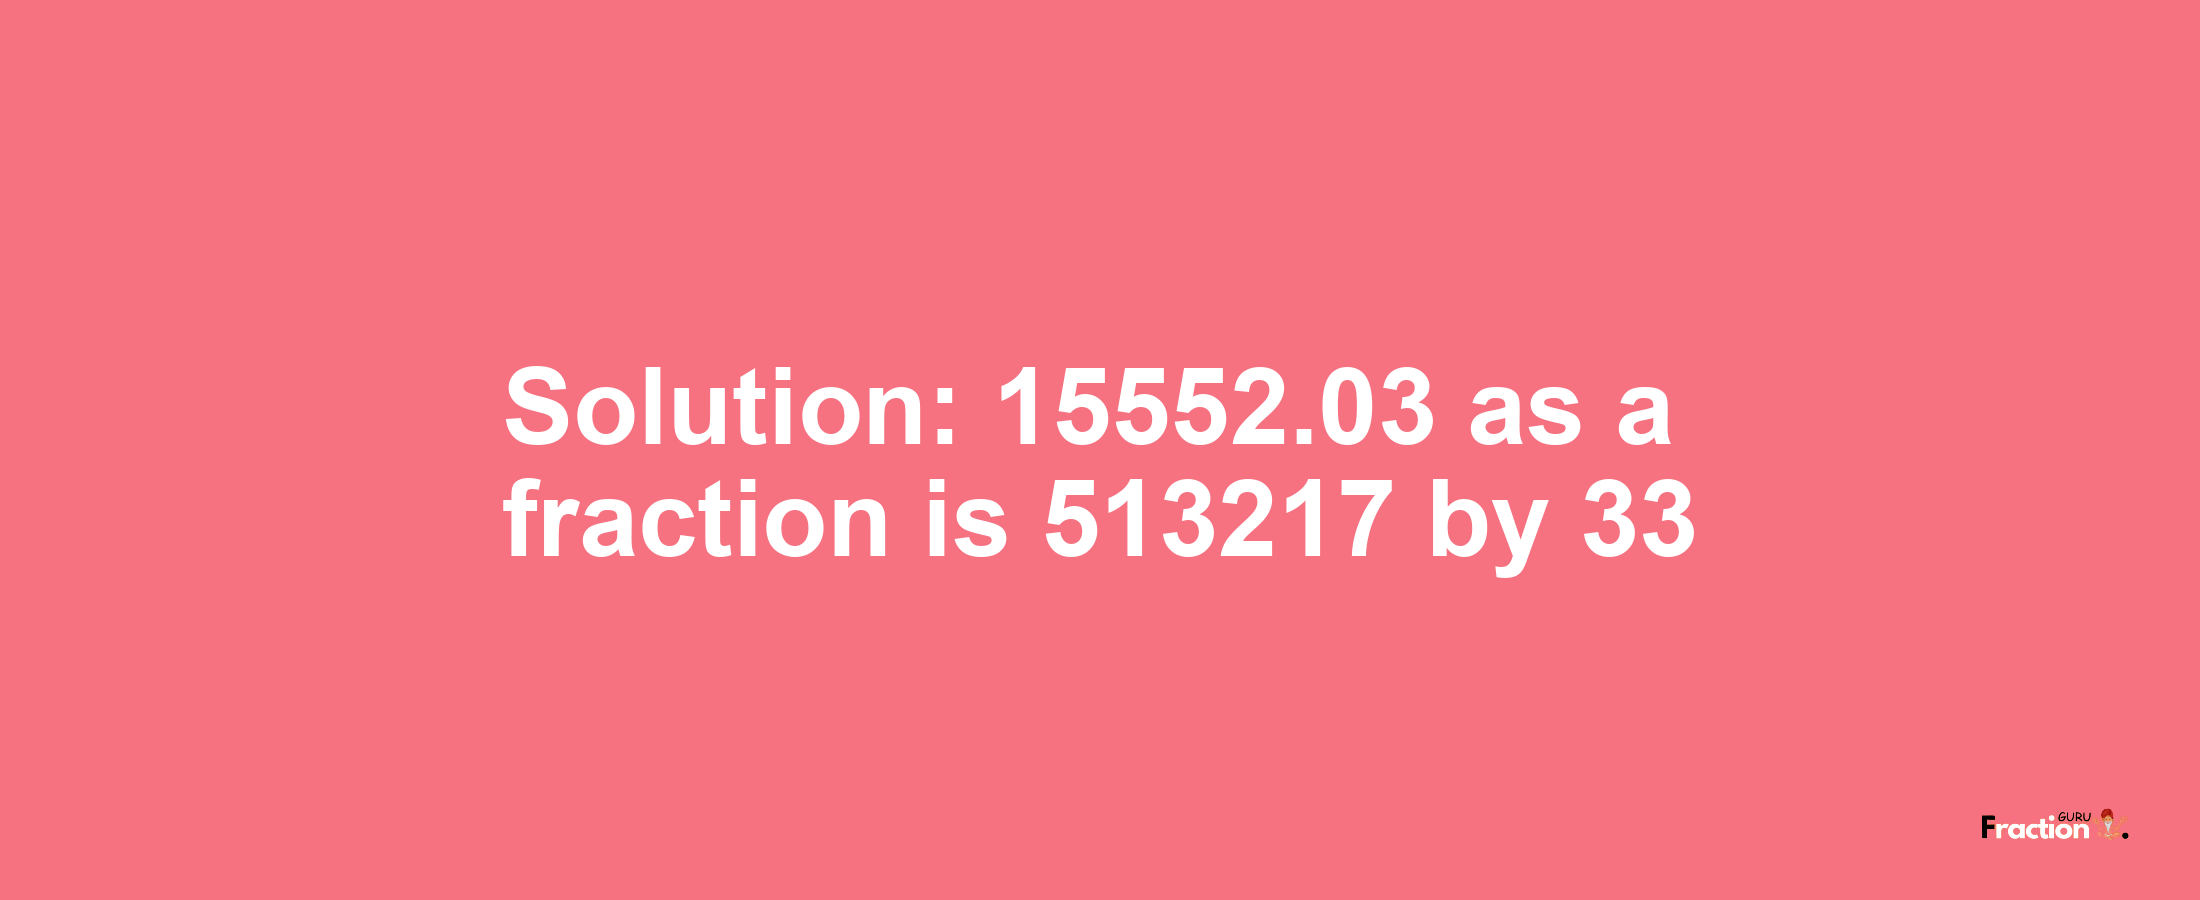 Solution:15552.03 as a fraction is 513217/33